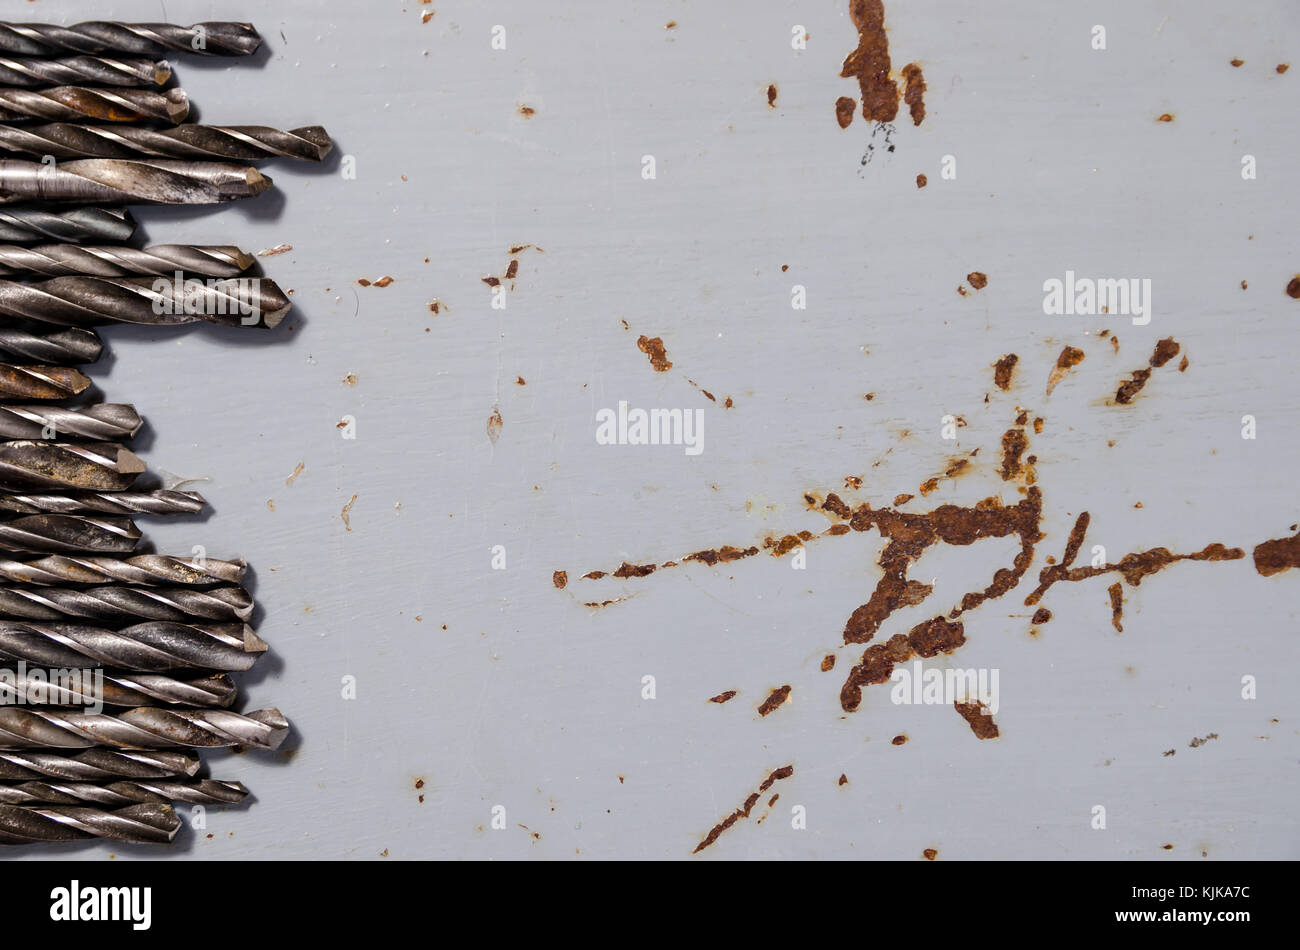 a lot of drills of different sizes on a painted metal background Stock Photo